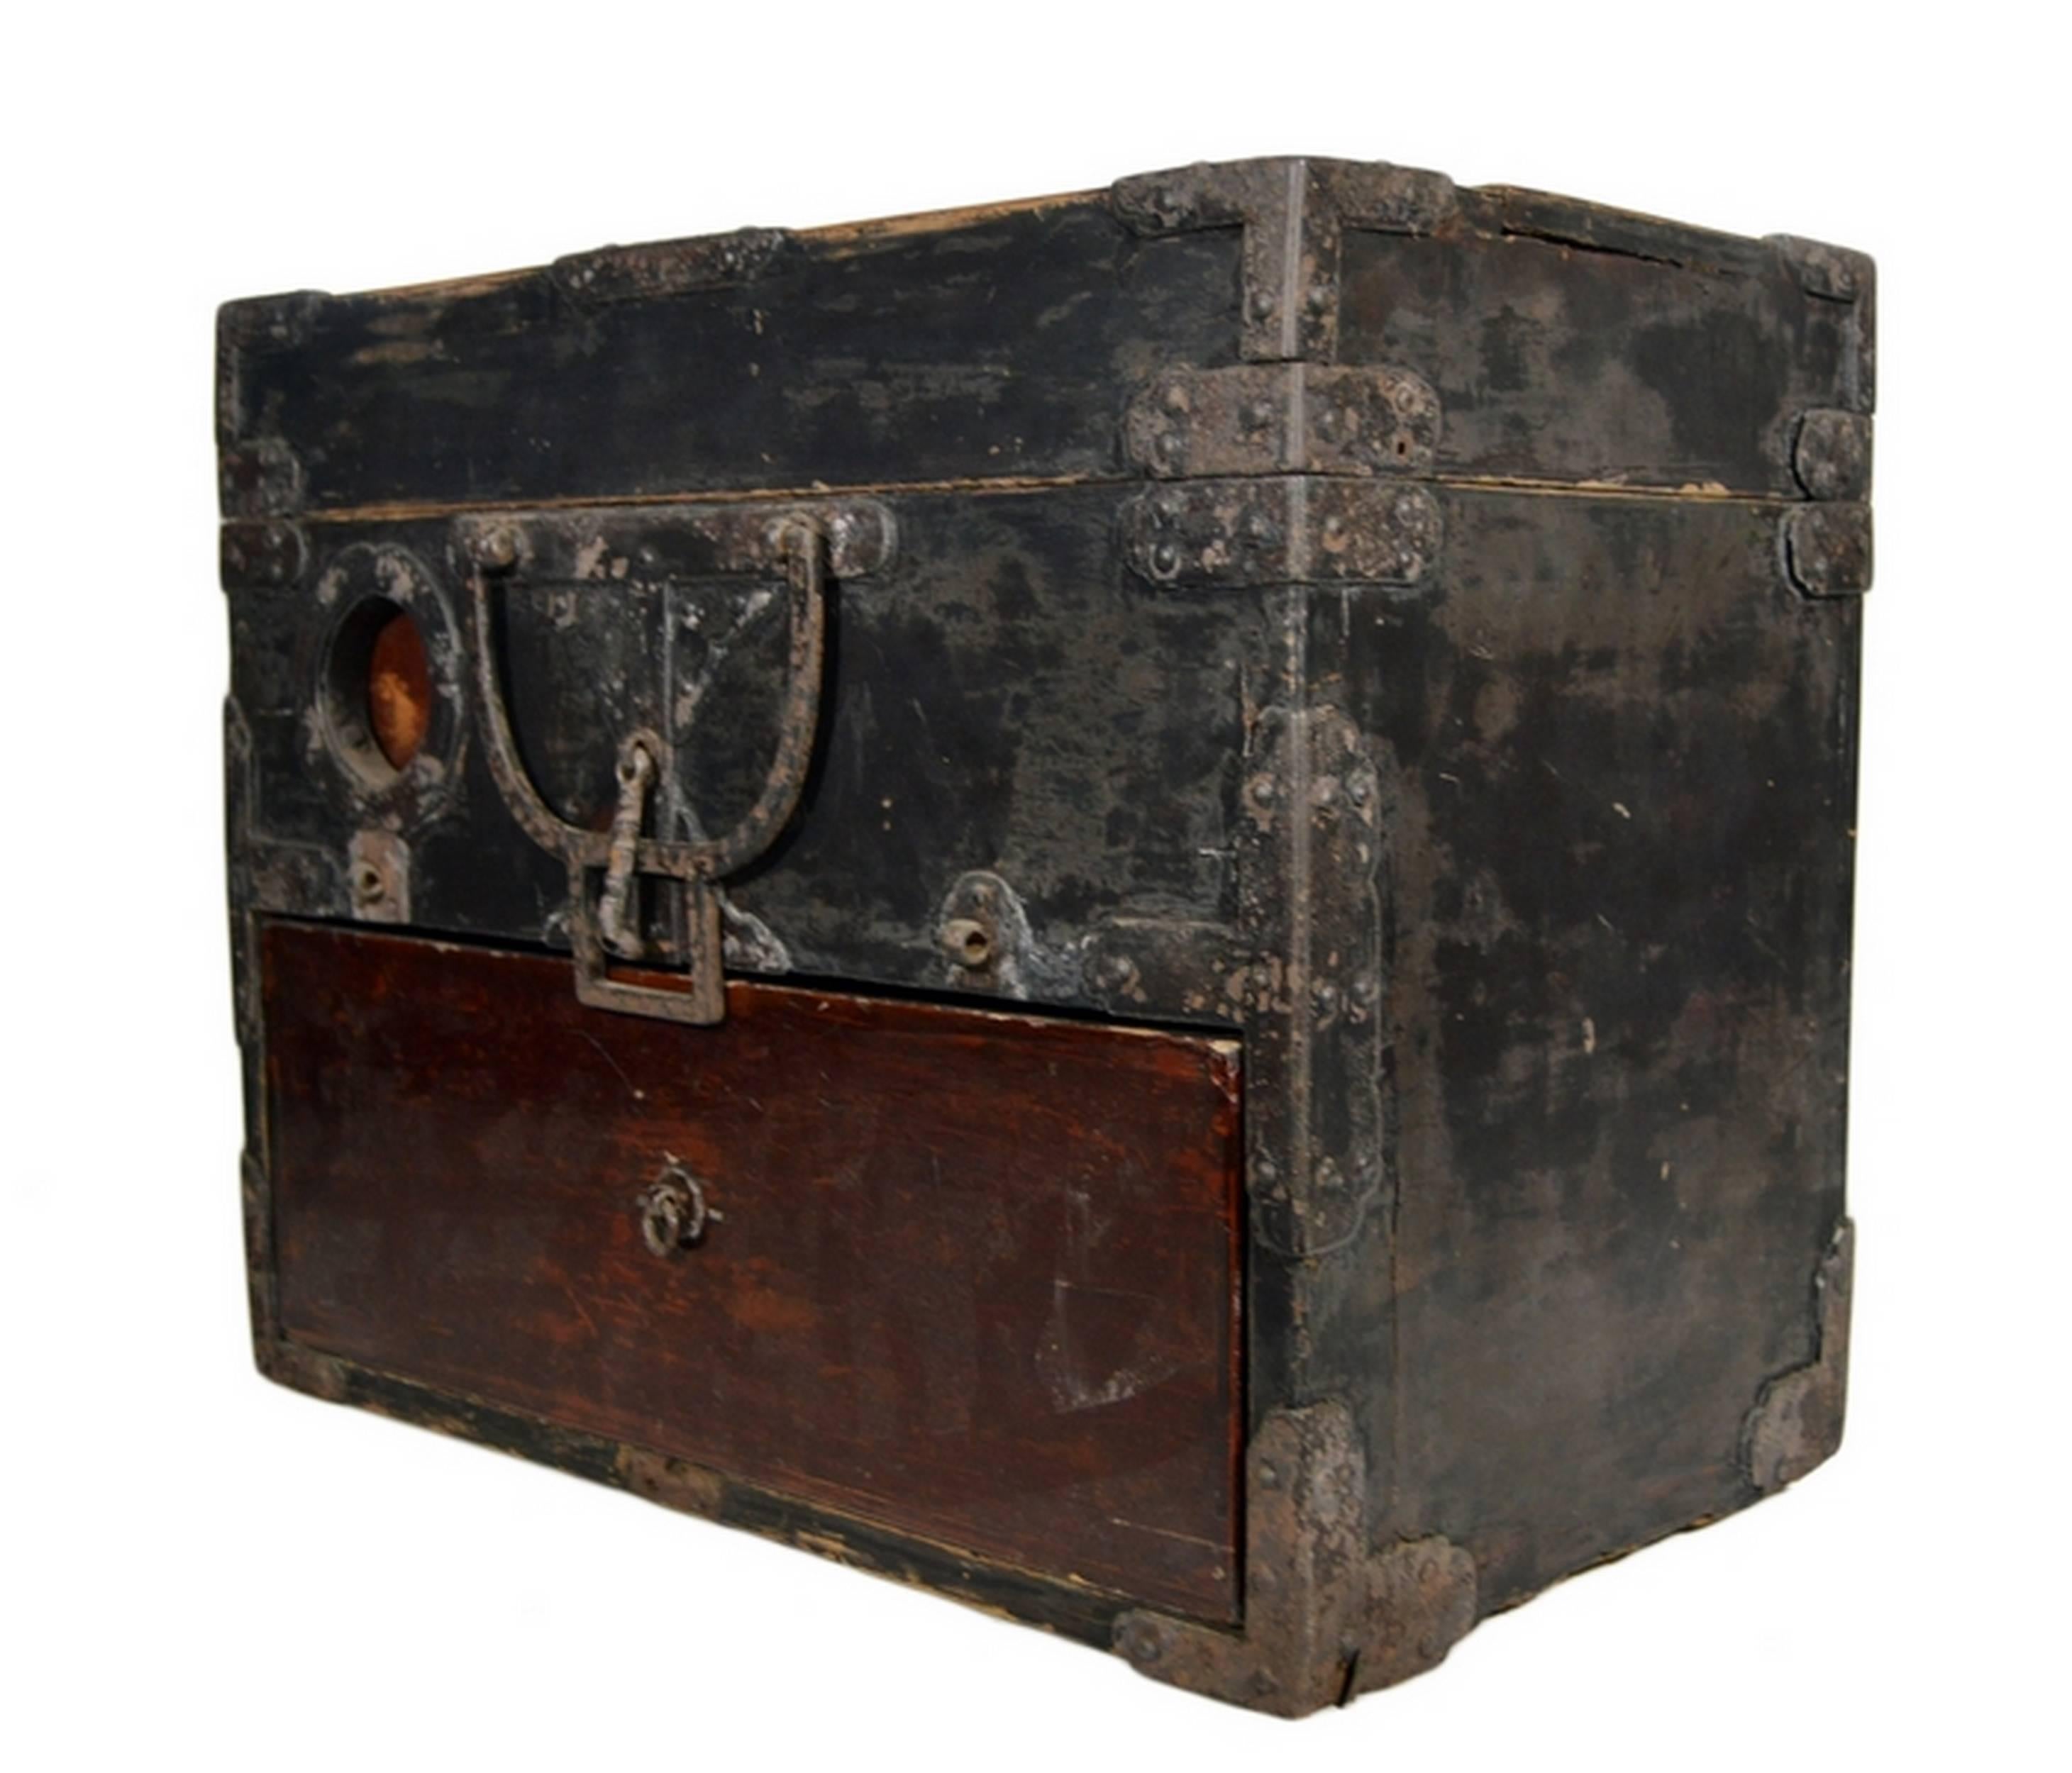 An antique handmade Chinese money box with metal hardware from the 19th century. This rectangular box is made of two-tone wood. The front displays a dark brown bottom drawer that opens via a simple metal ring pull.  Above sits a metal handle that